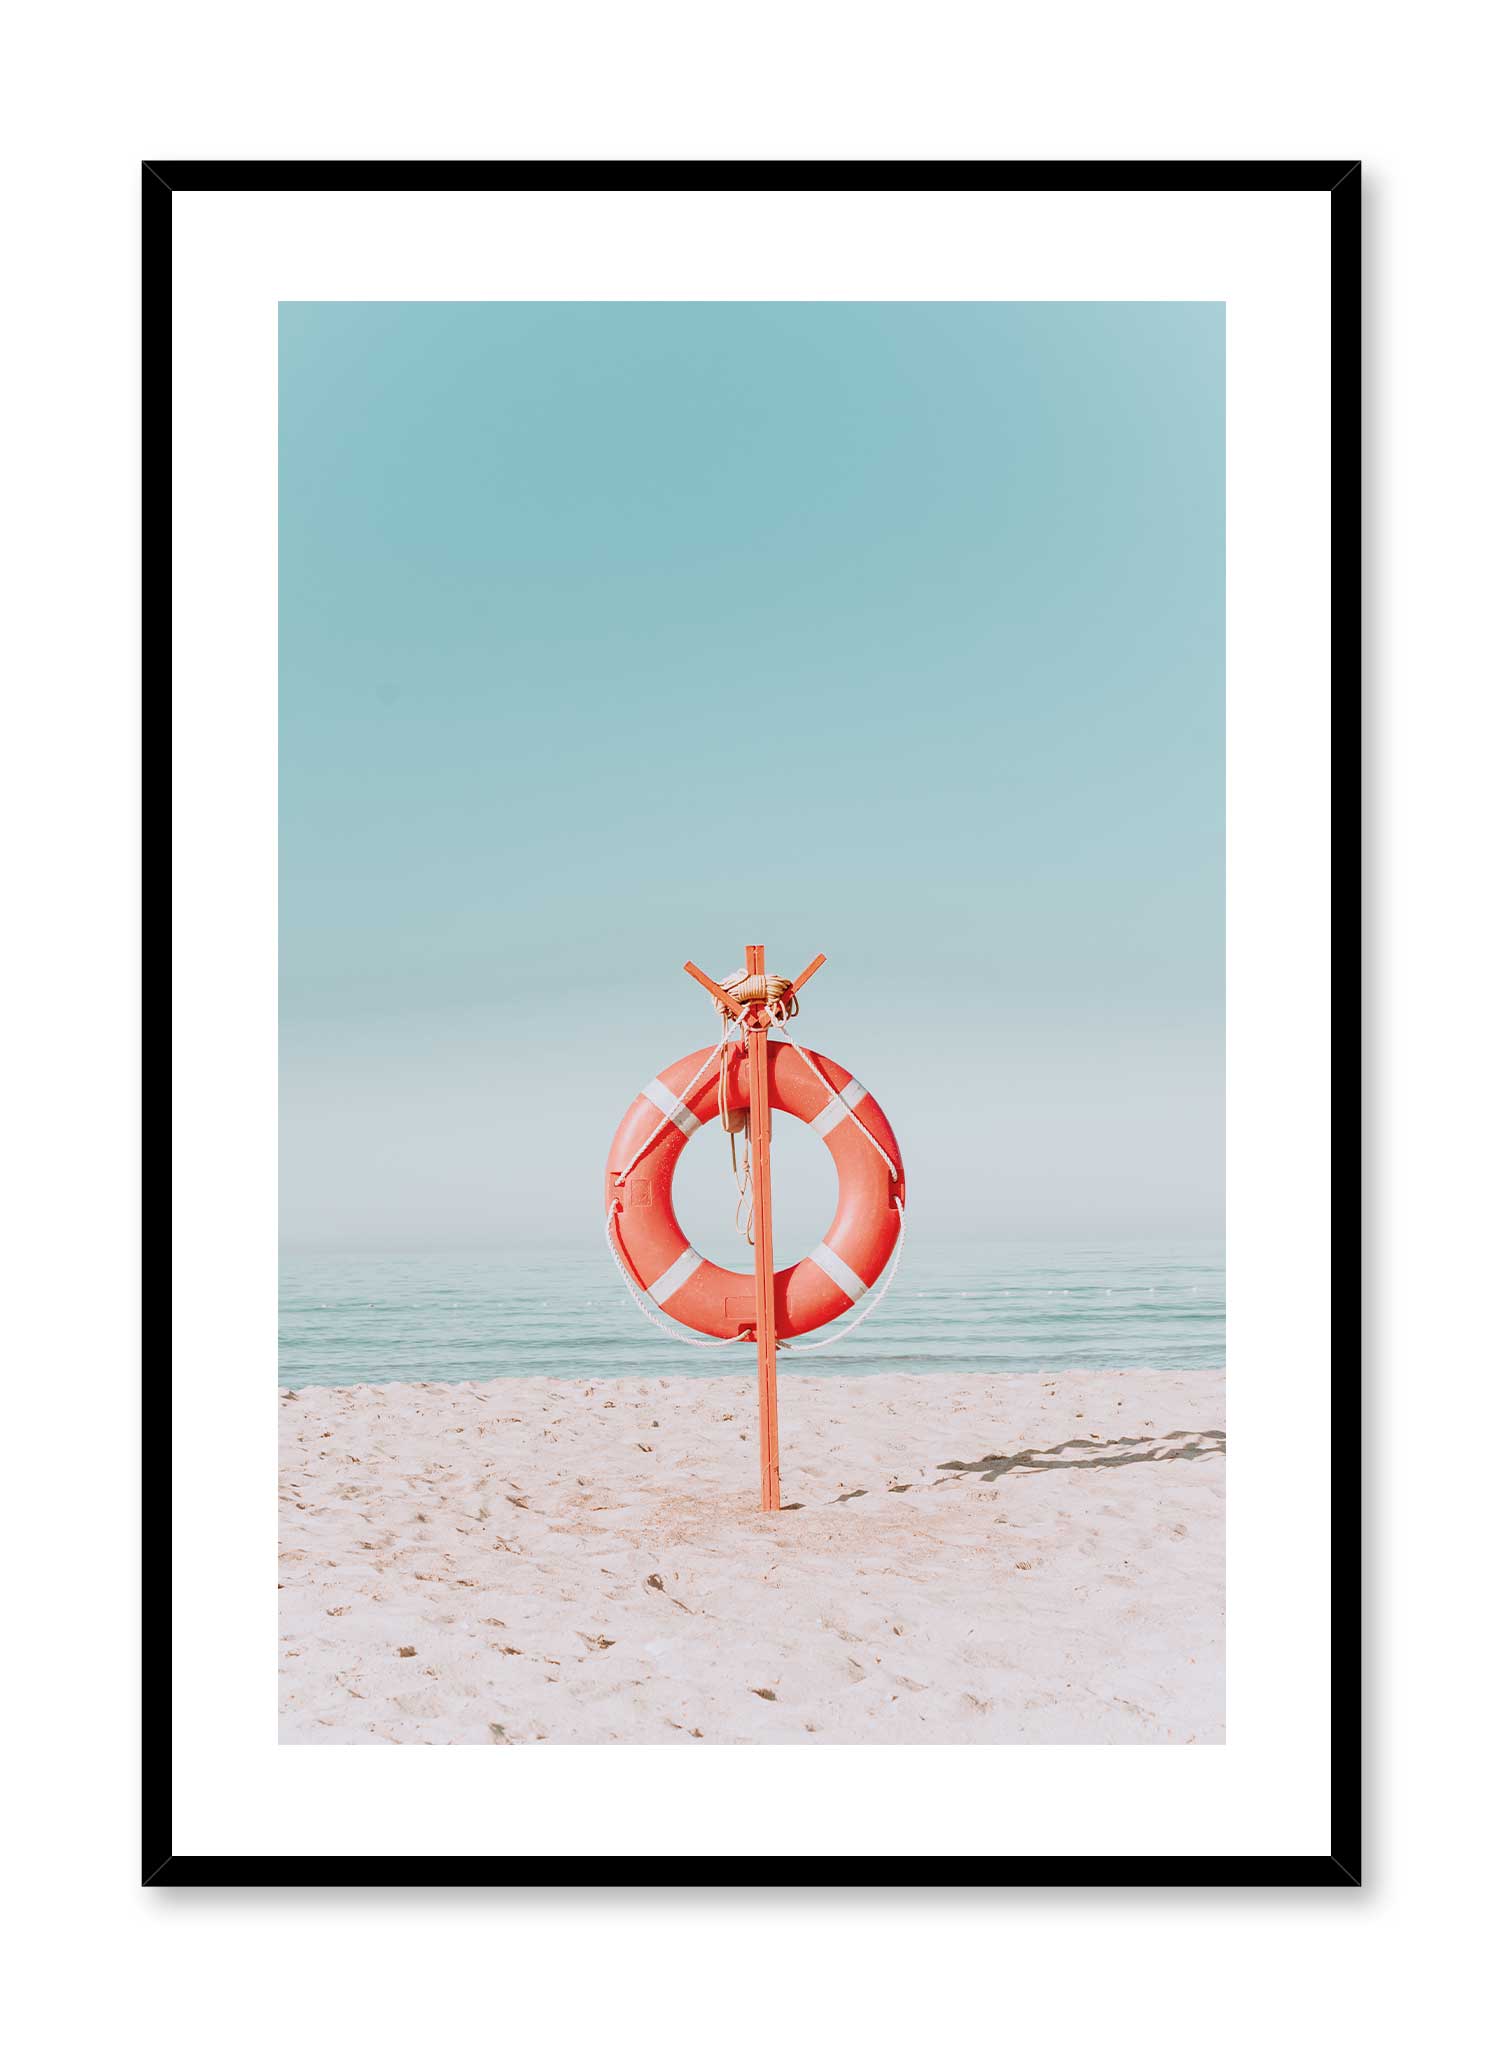 Baywatch is a minimalist photography of a bright orange life ring on a stand in the middle of the beach by Opposite Wall.